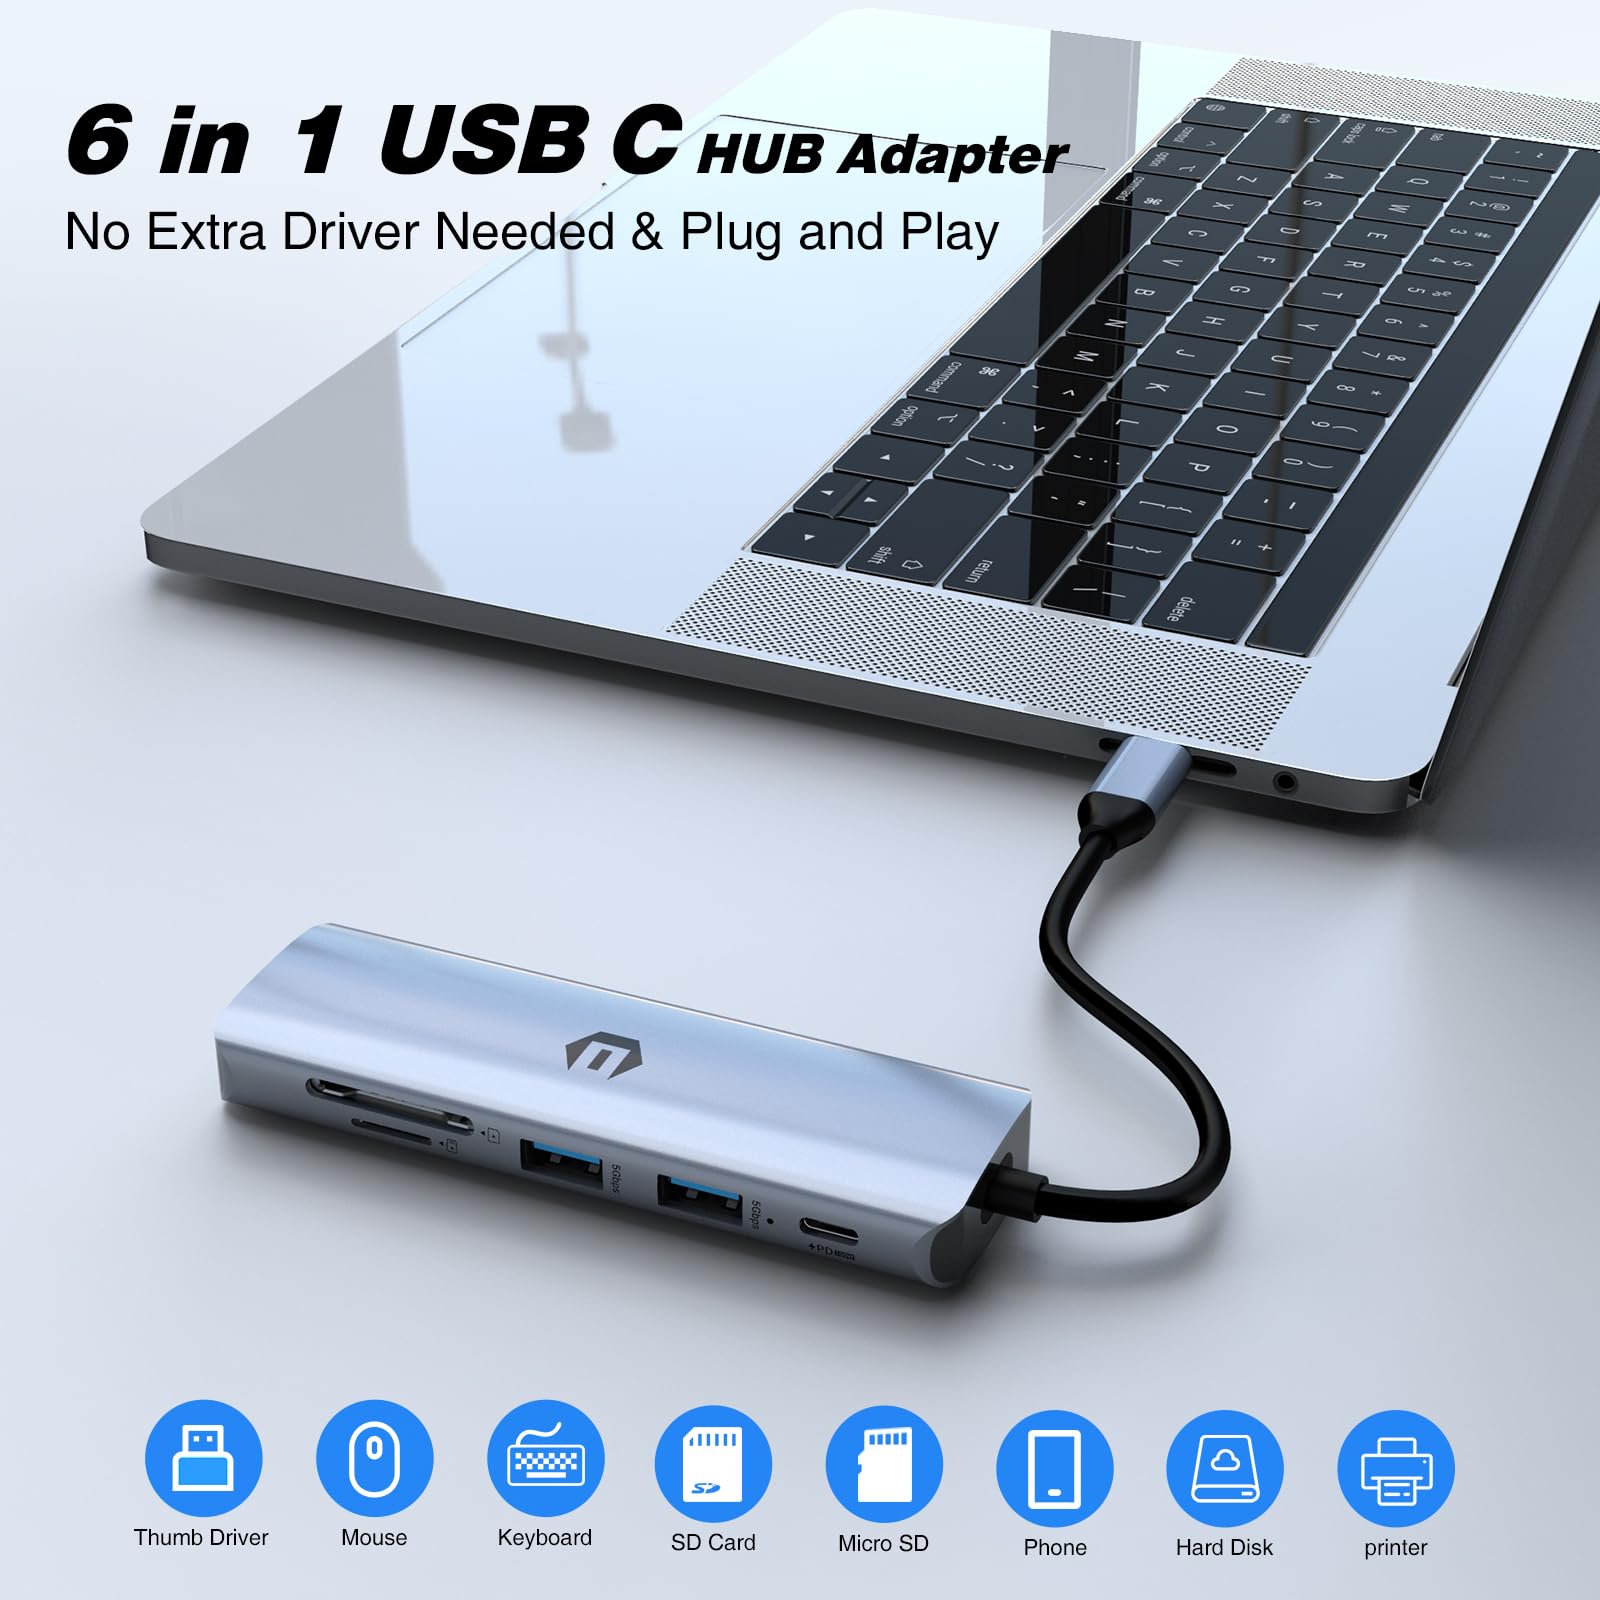 oditton USB C Hub, 6 in 1 Multiport Connector, 4K HDMI, 100W Power Delivery, 3 x USB 3.0, SD/TF Card Reader for Laptops and Mobile Devices, Compatible with USB C Laptops from Dell/HP/Surface